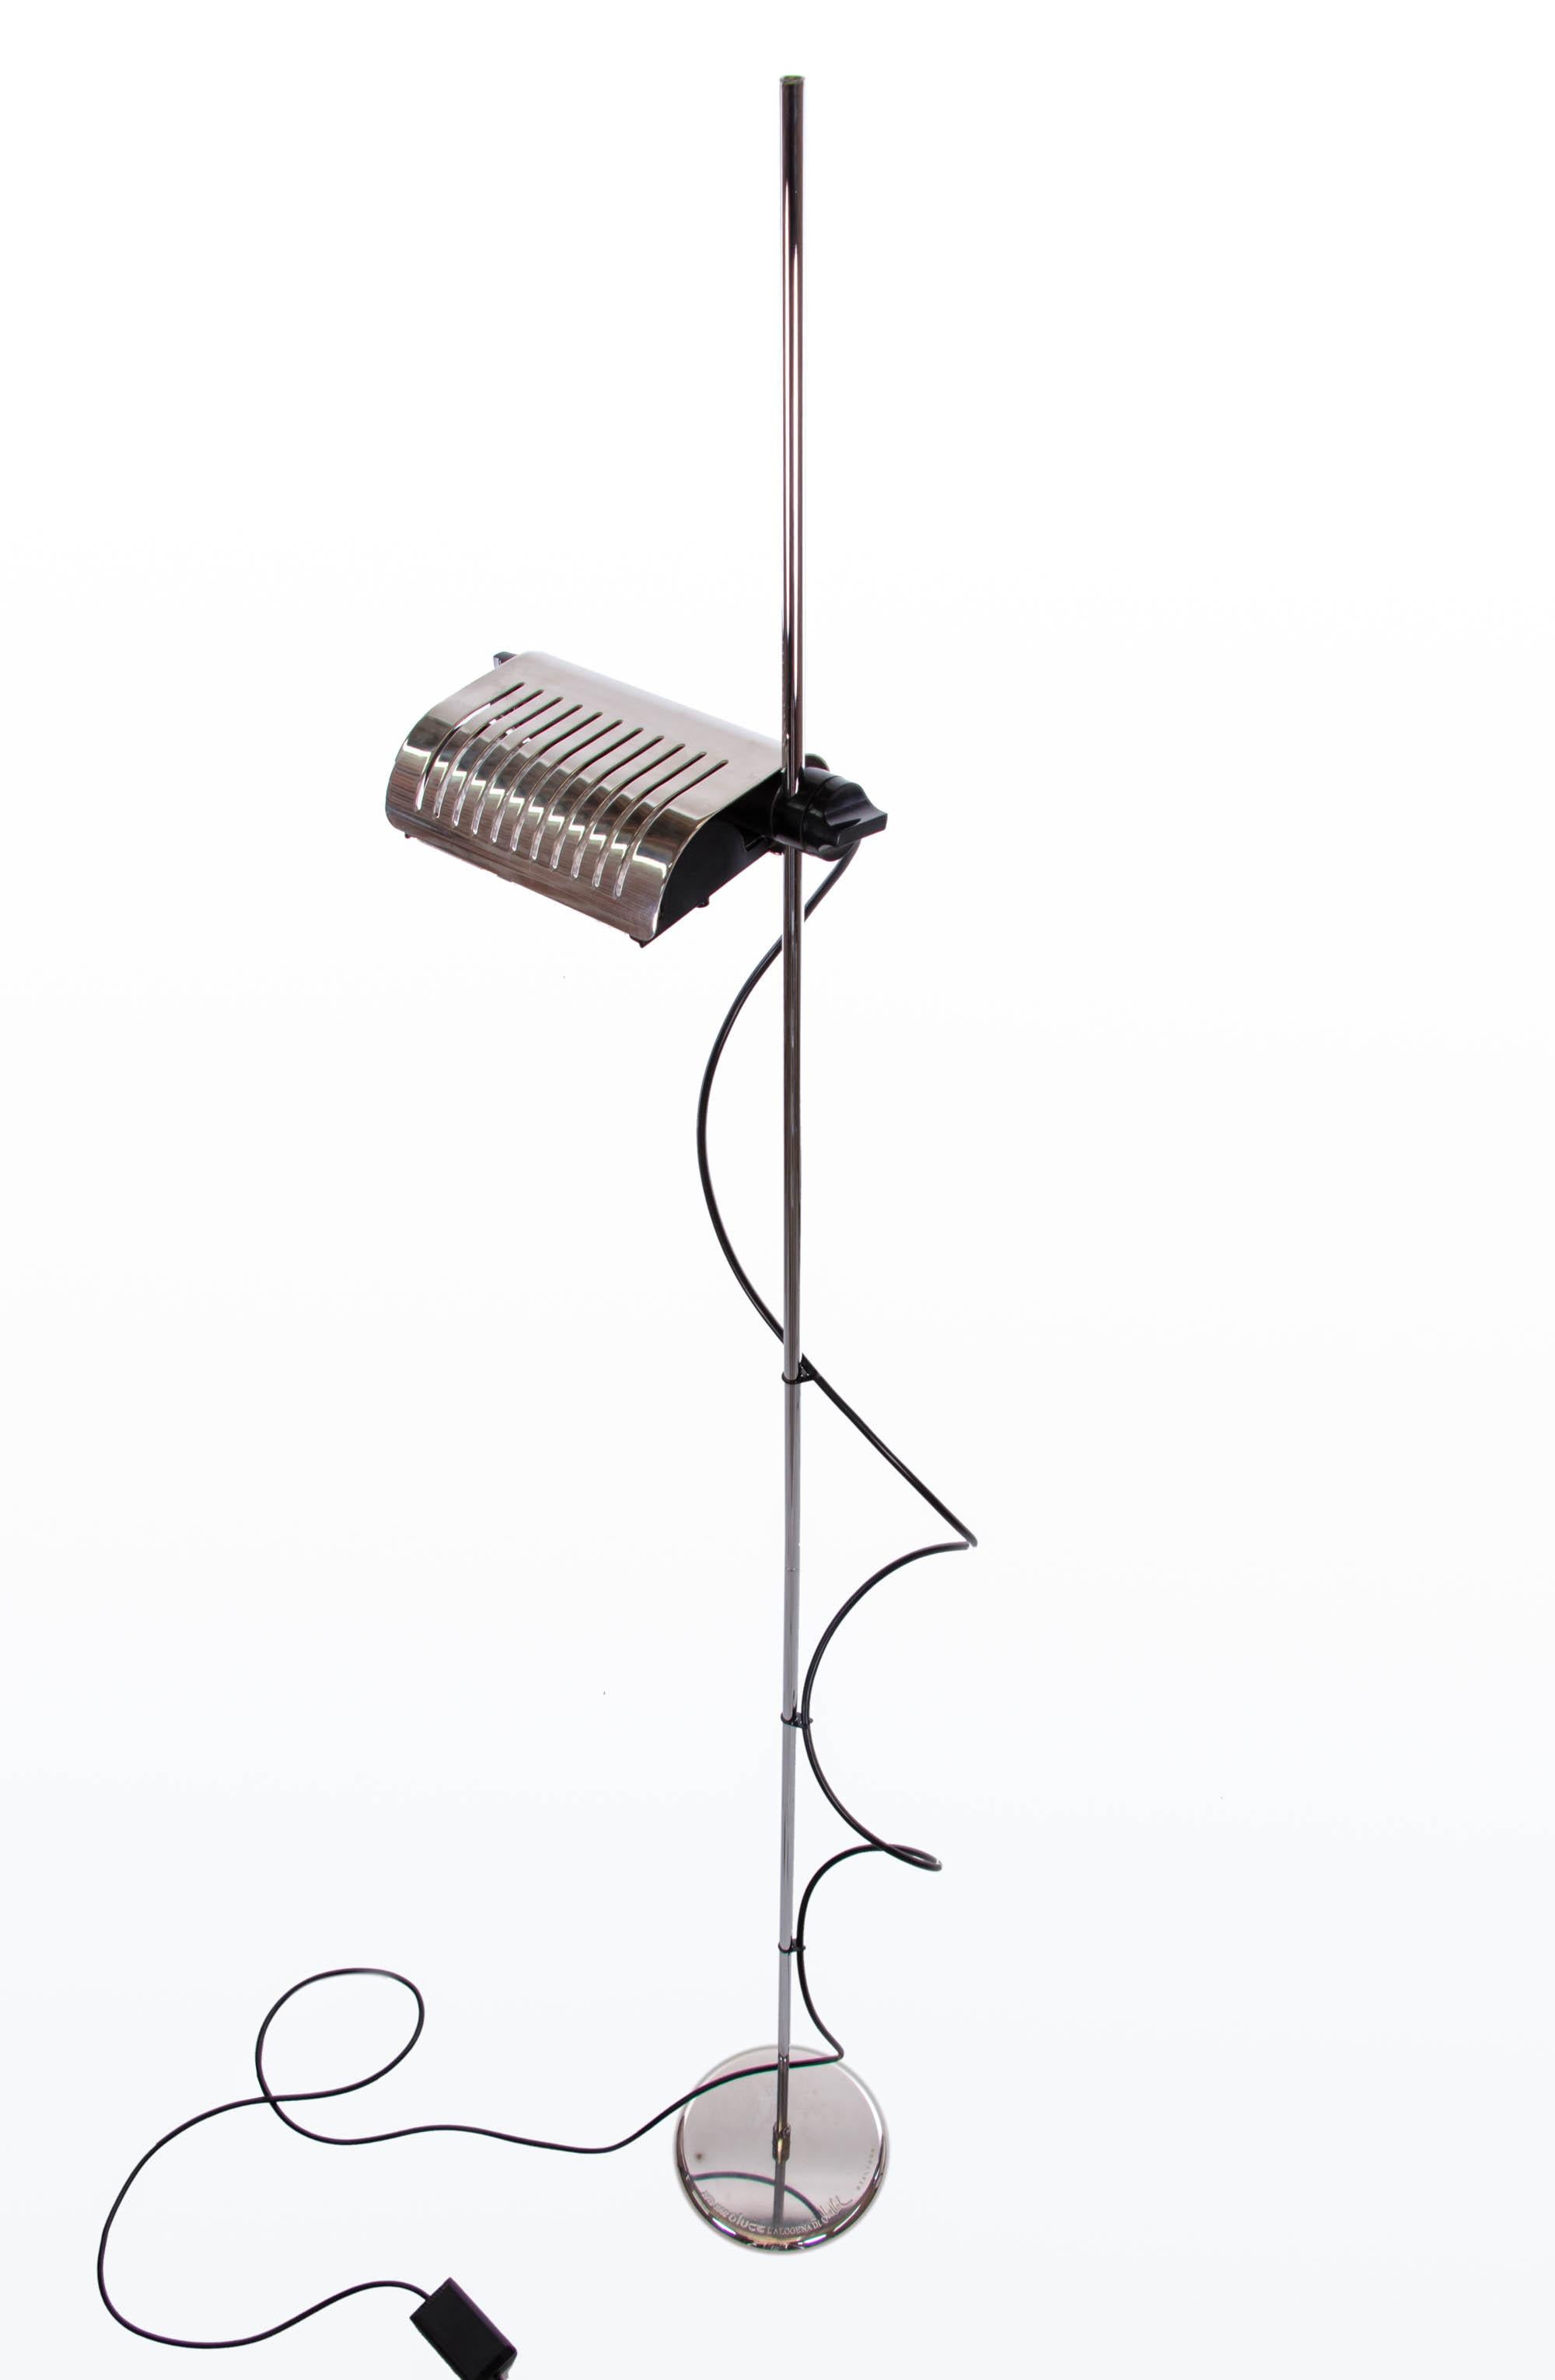 Metal Alogena Floor Lamp by Joe Colombo for Oluce Italy, Limited Edition